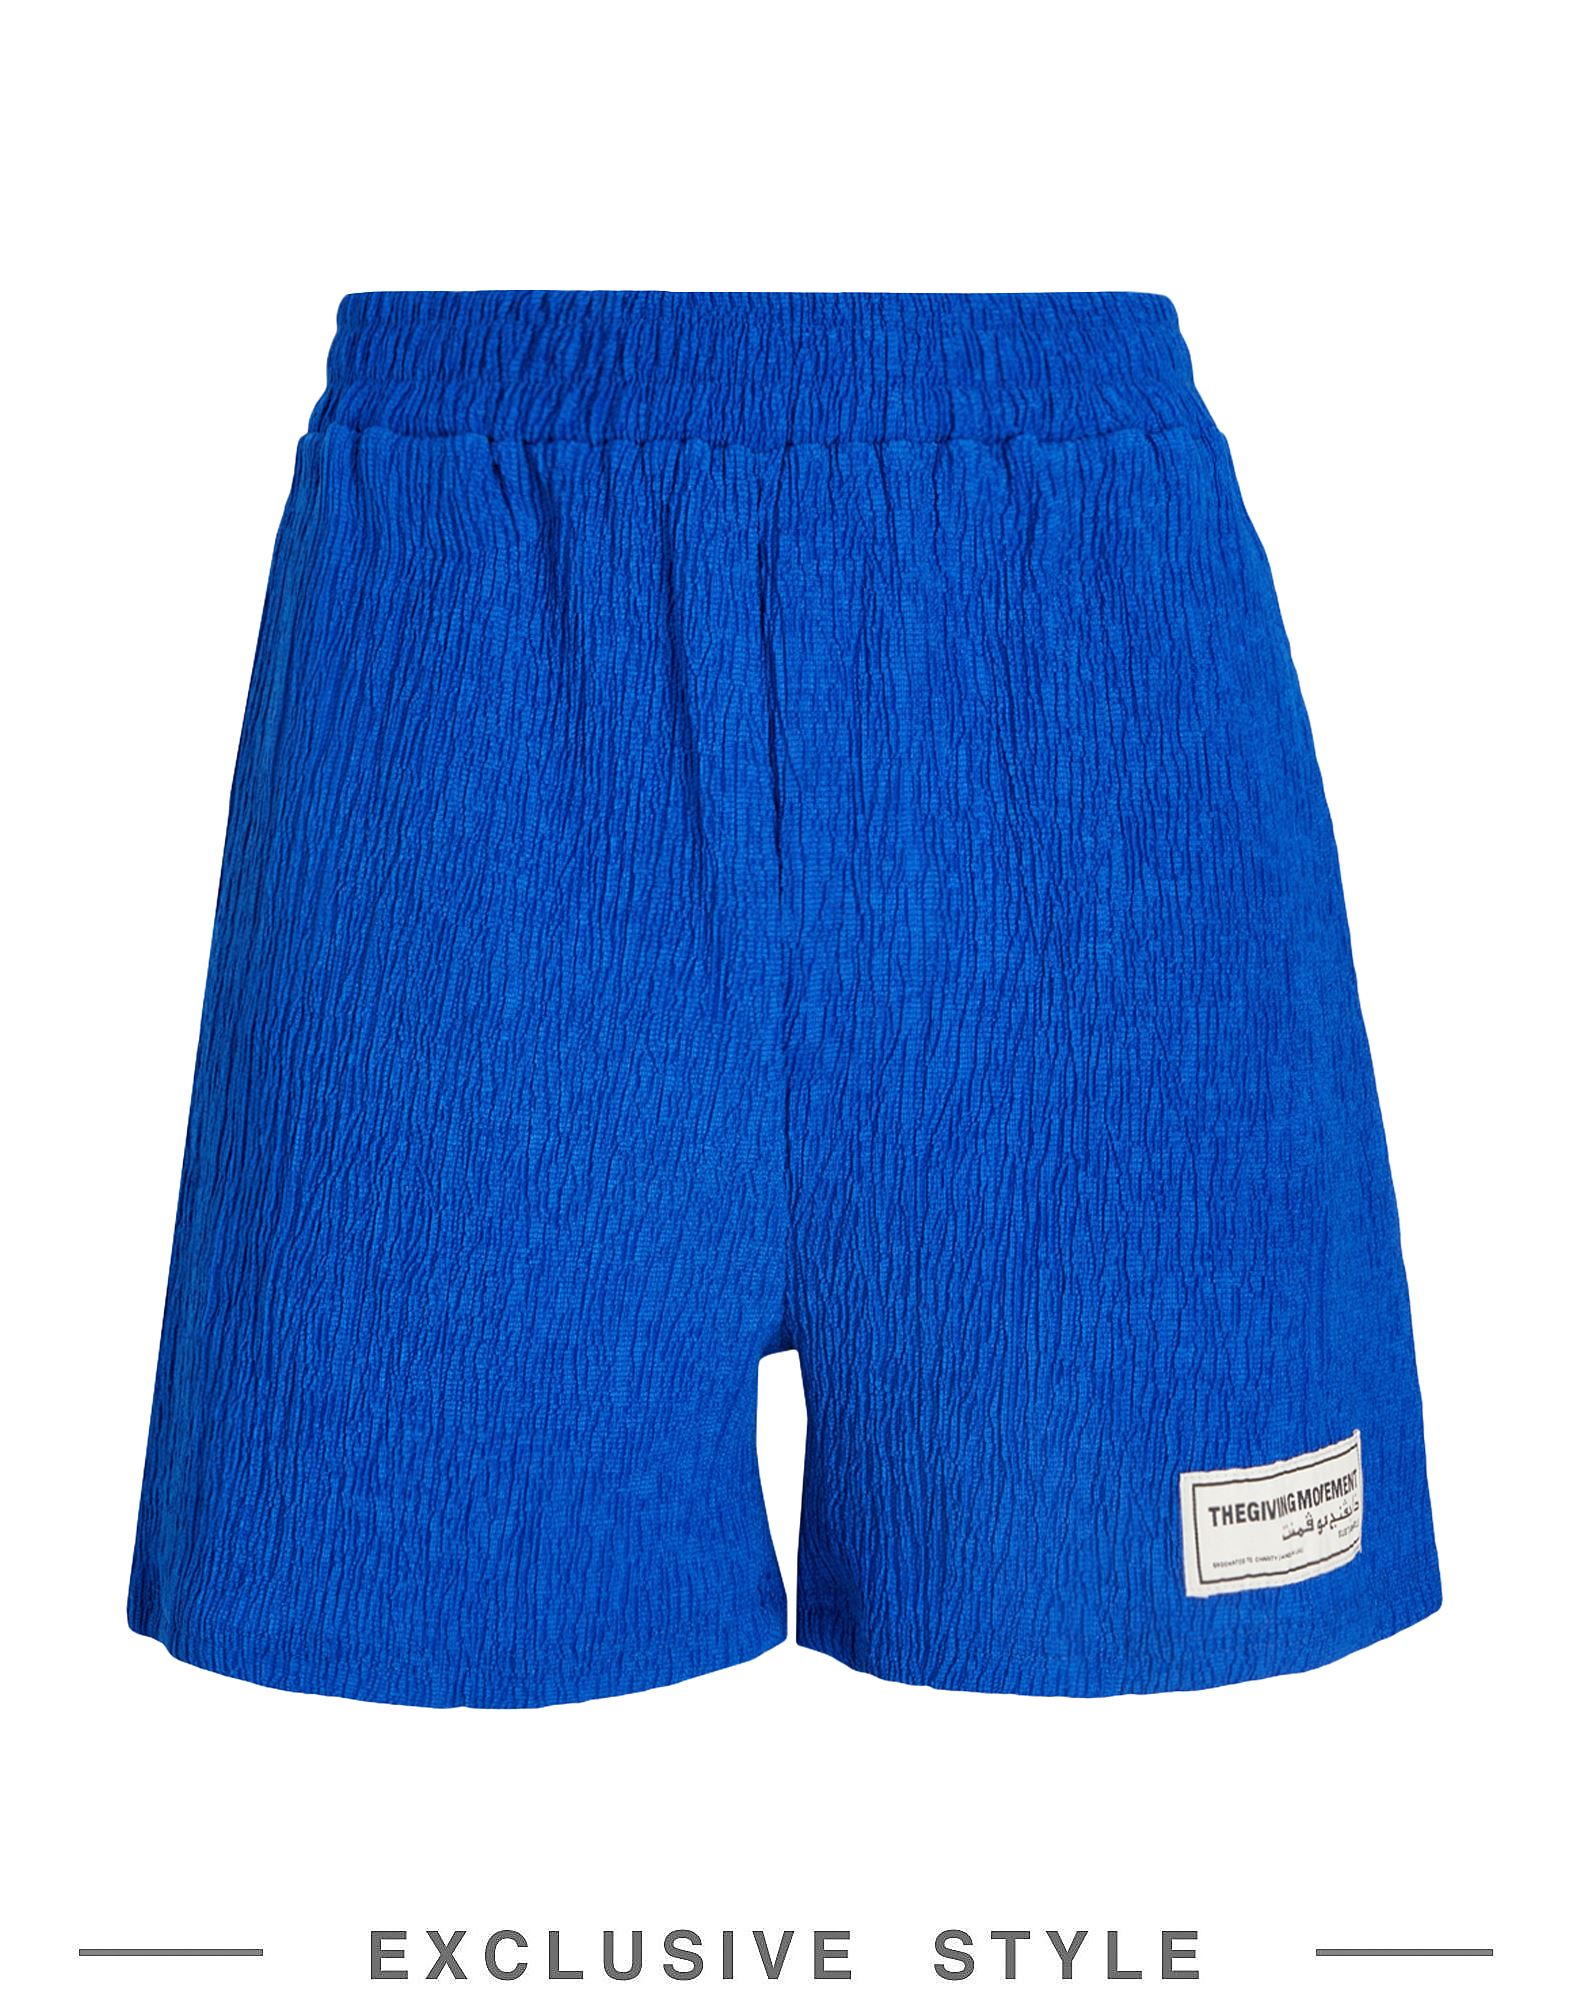 The Giving Movement X Yoox Woman Shorts & Bermuda Shorts Bright Blue Size M Recycled Polyester, Recy